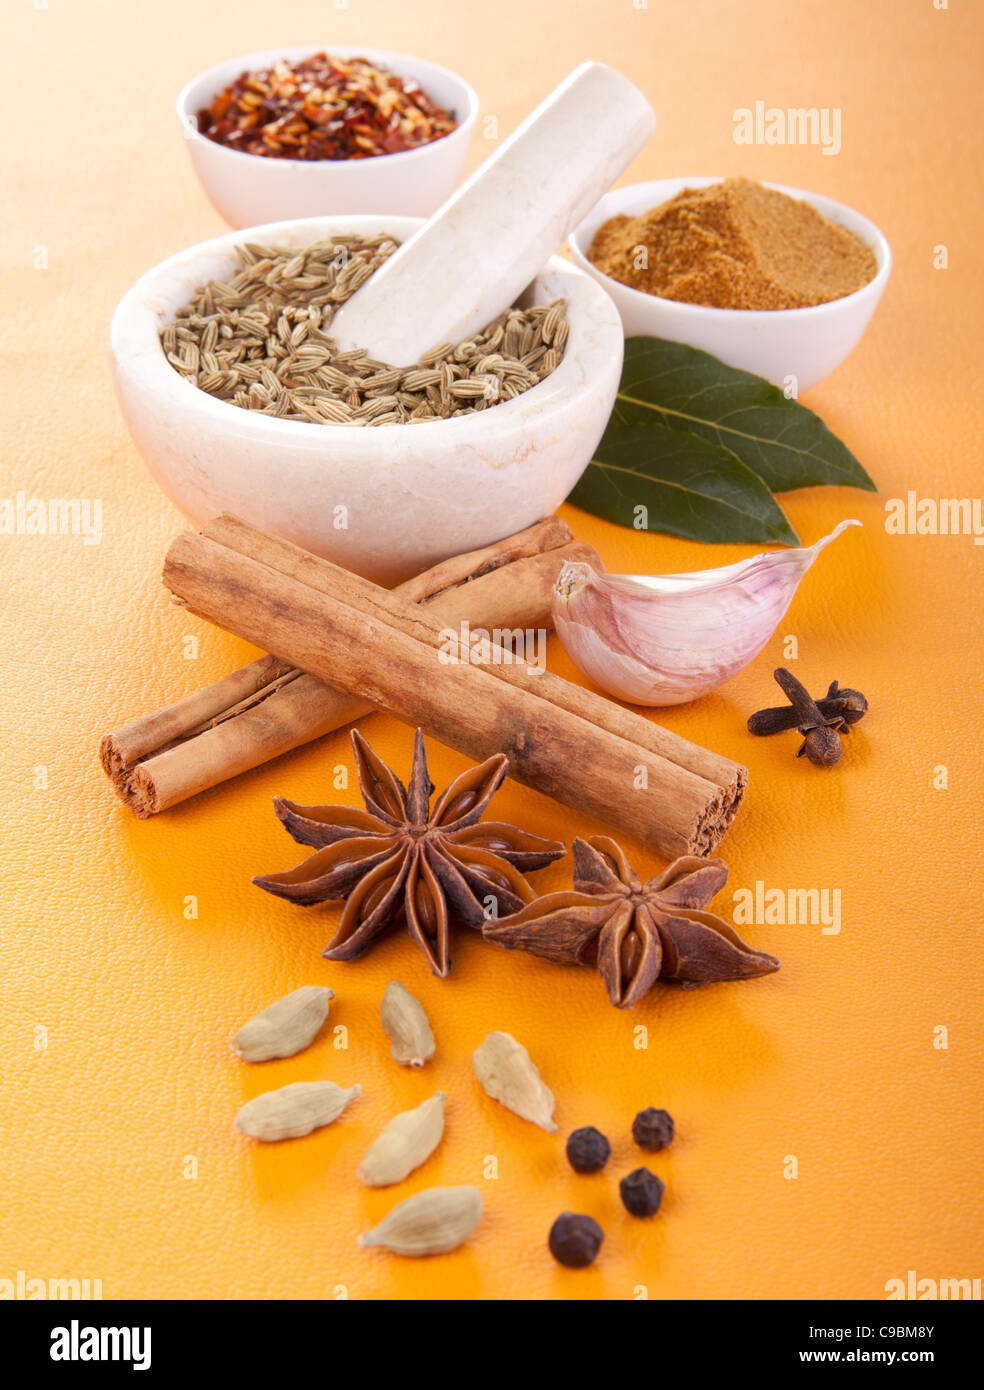 EASTERN SPICES Stock Photo